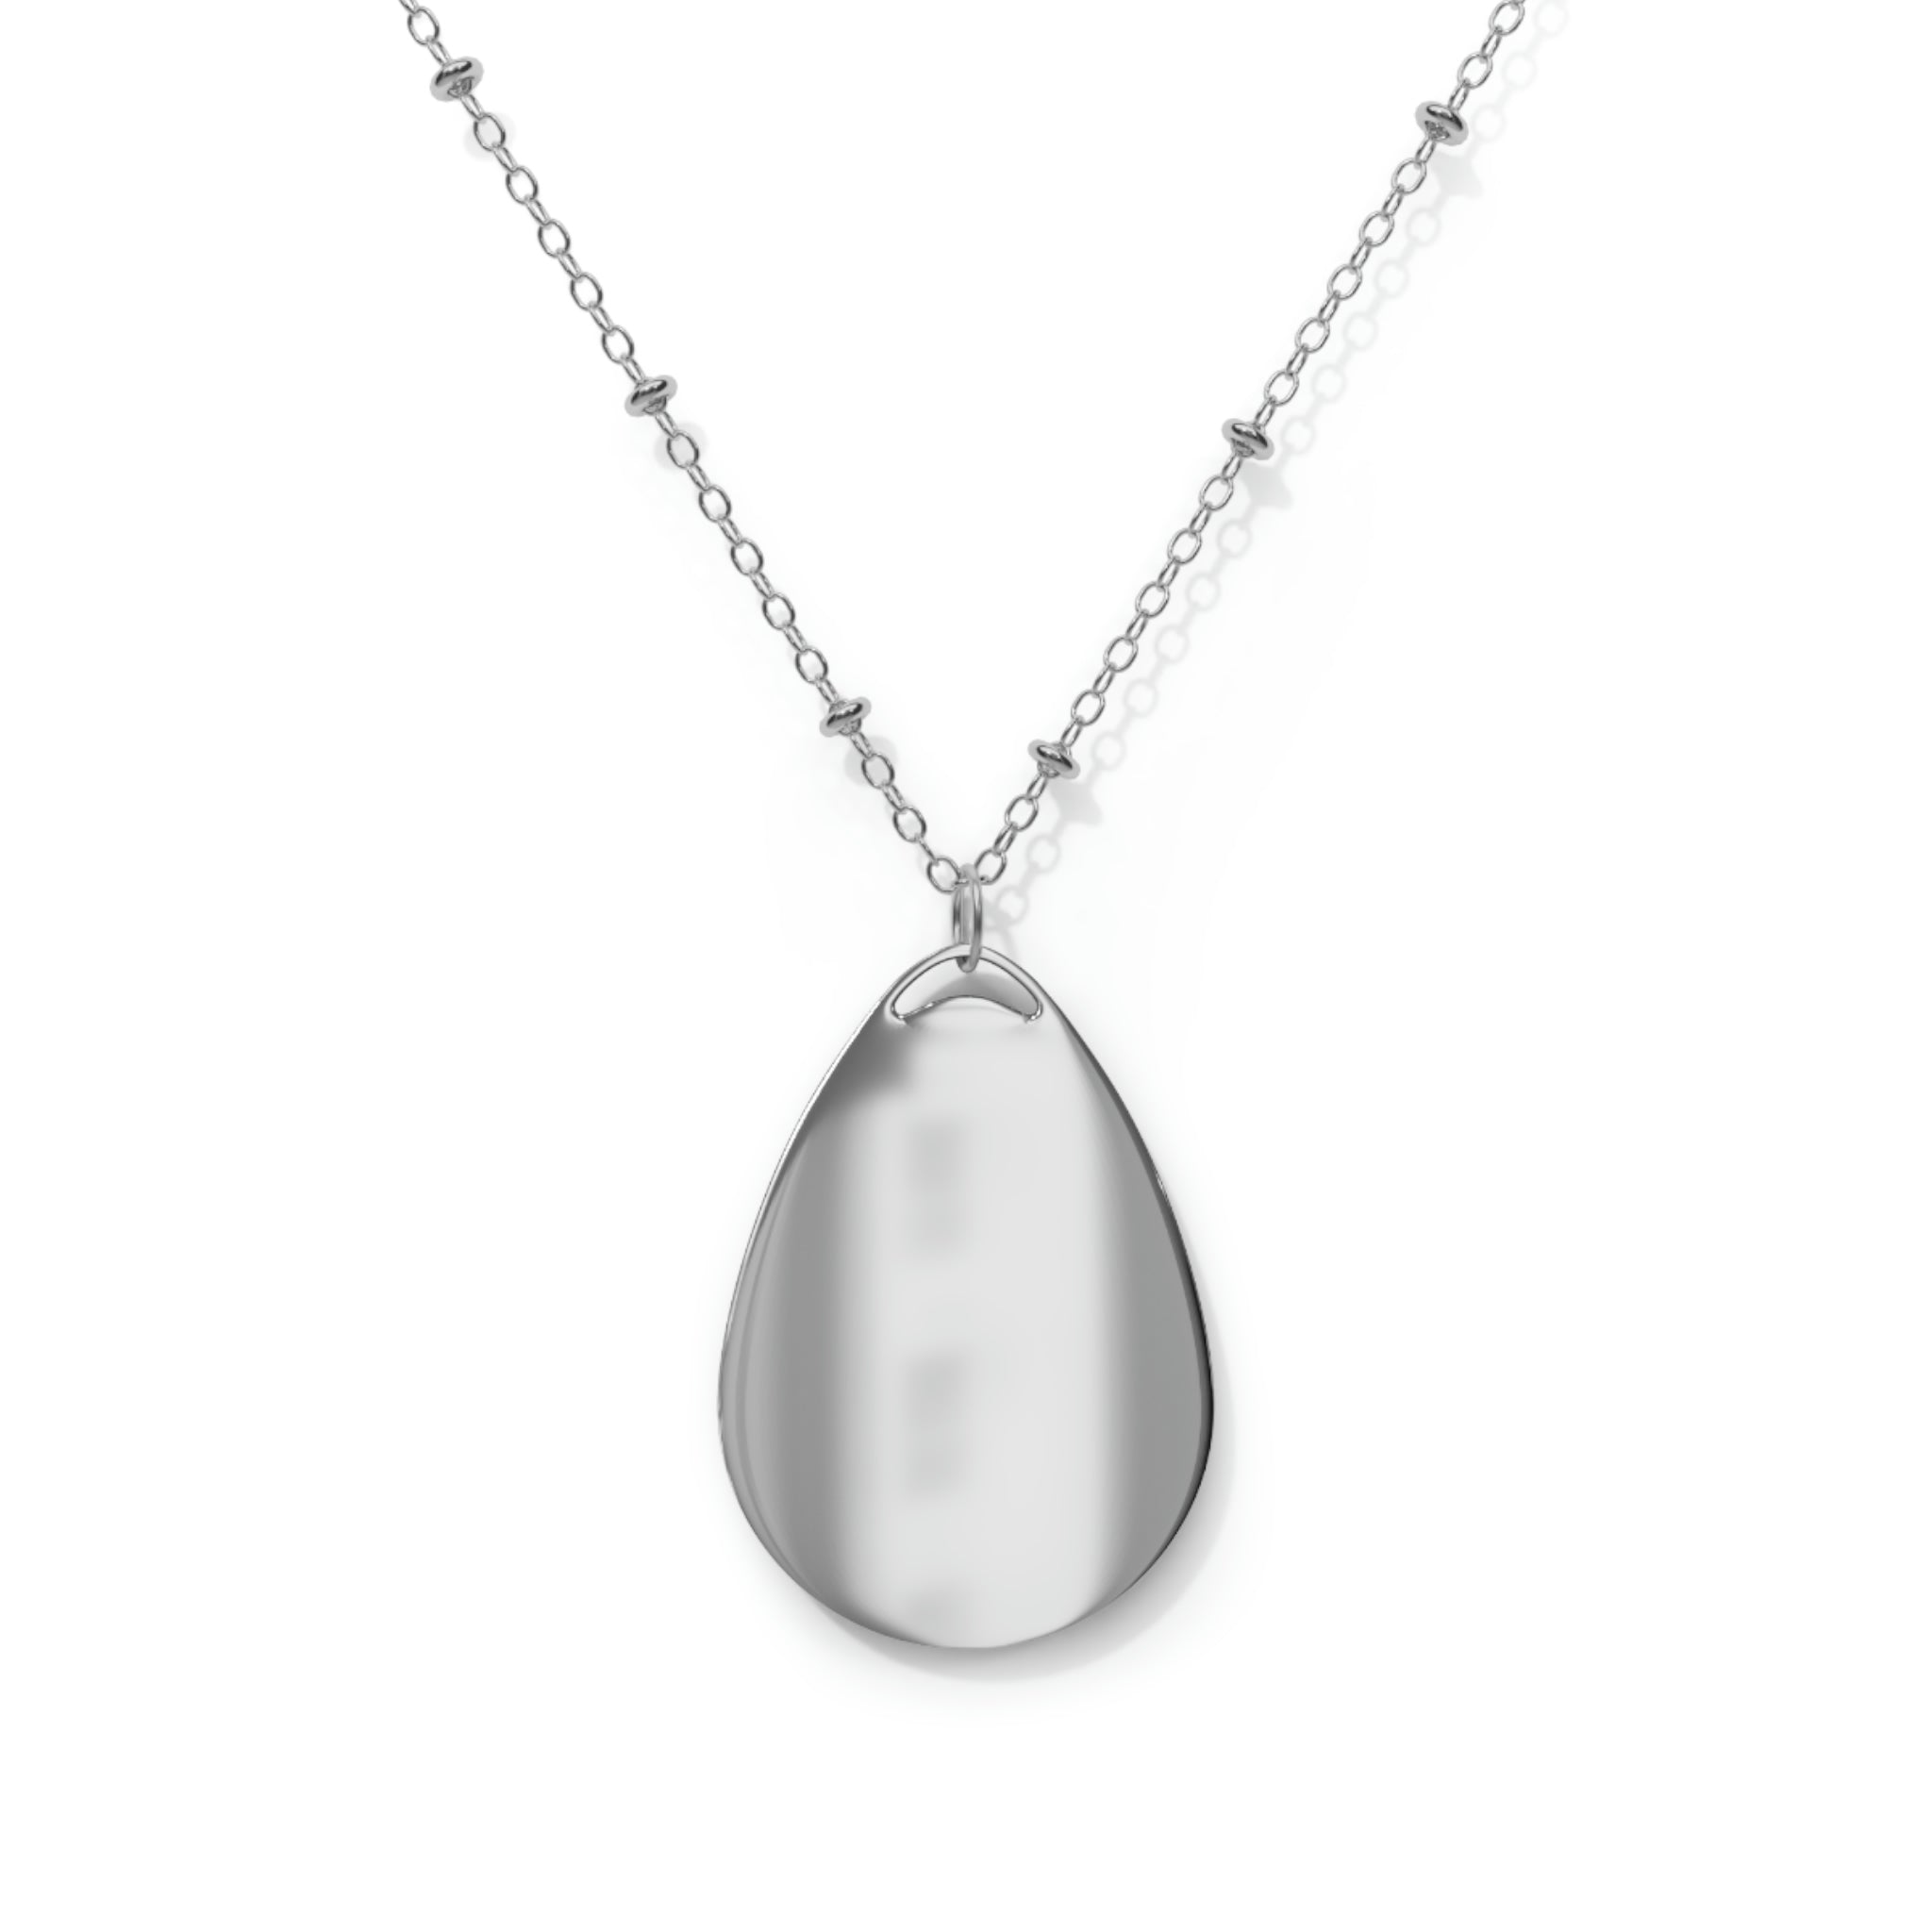 Babe/Oval Necklace